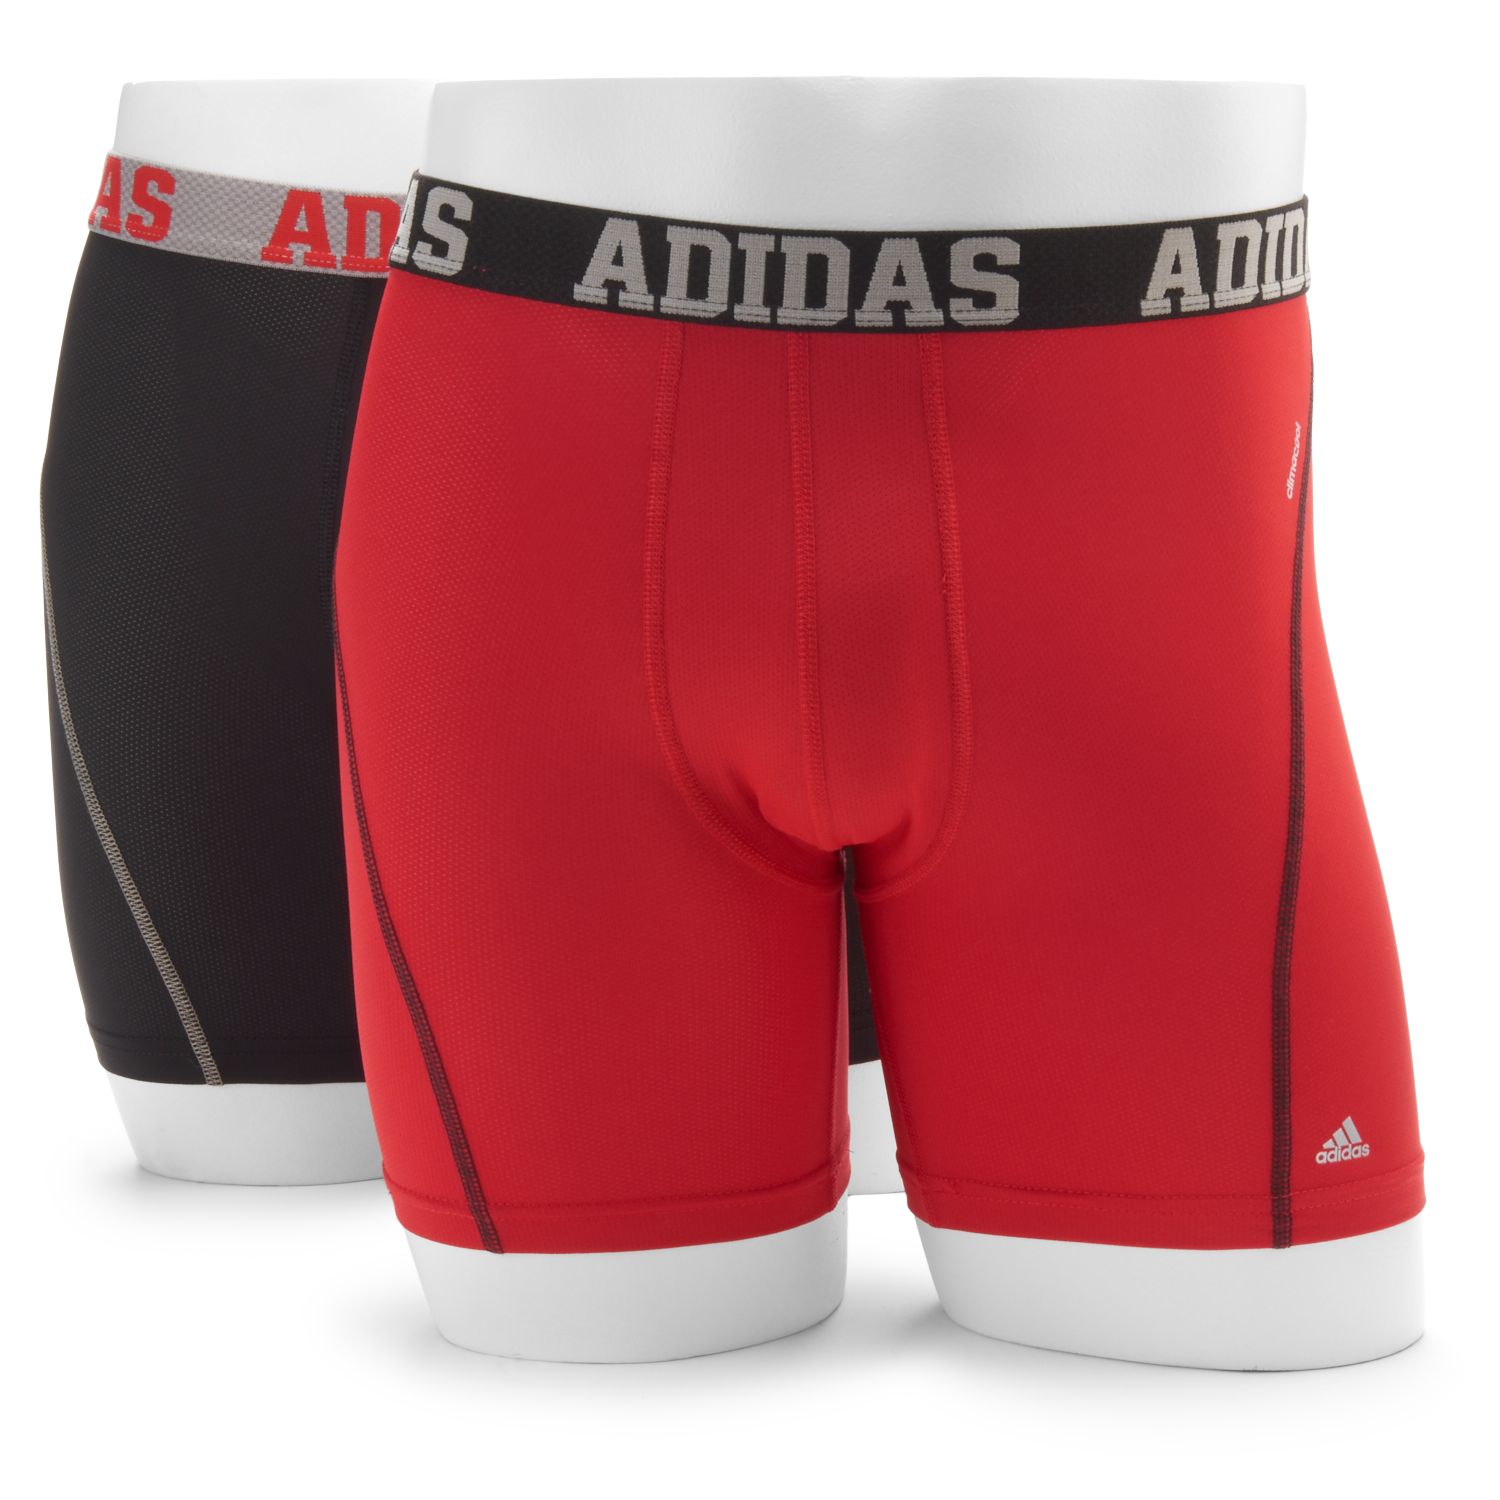 adidas men's climacool 7 midway briefs 80